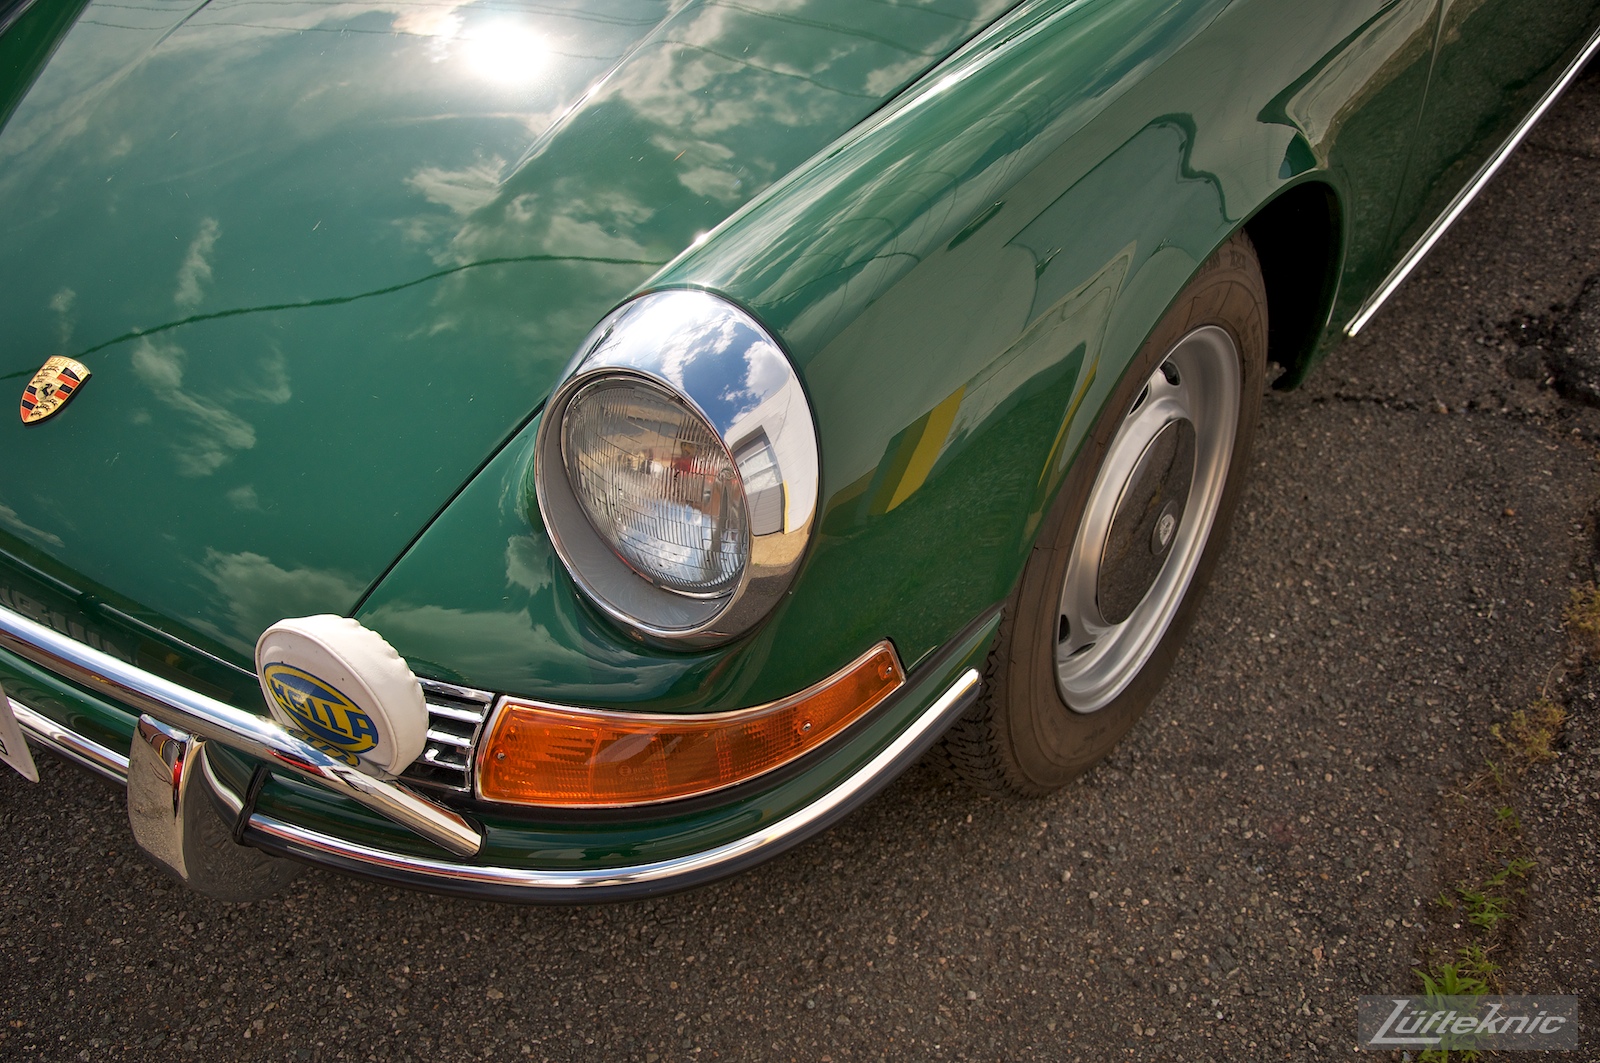 An Irish Green Porsche 912 which has been completely restored by Lufteknic sitting in the shop parking lot.